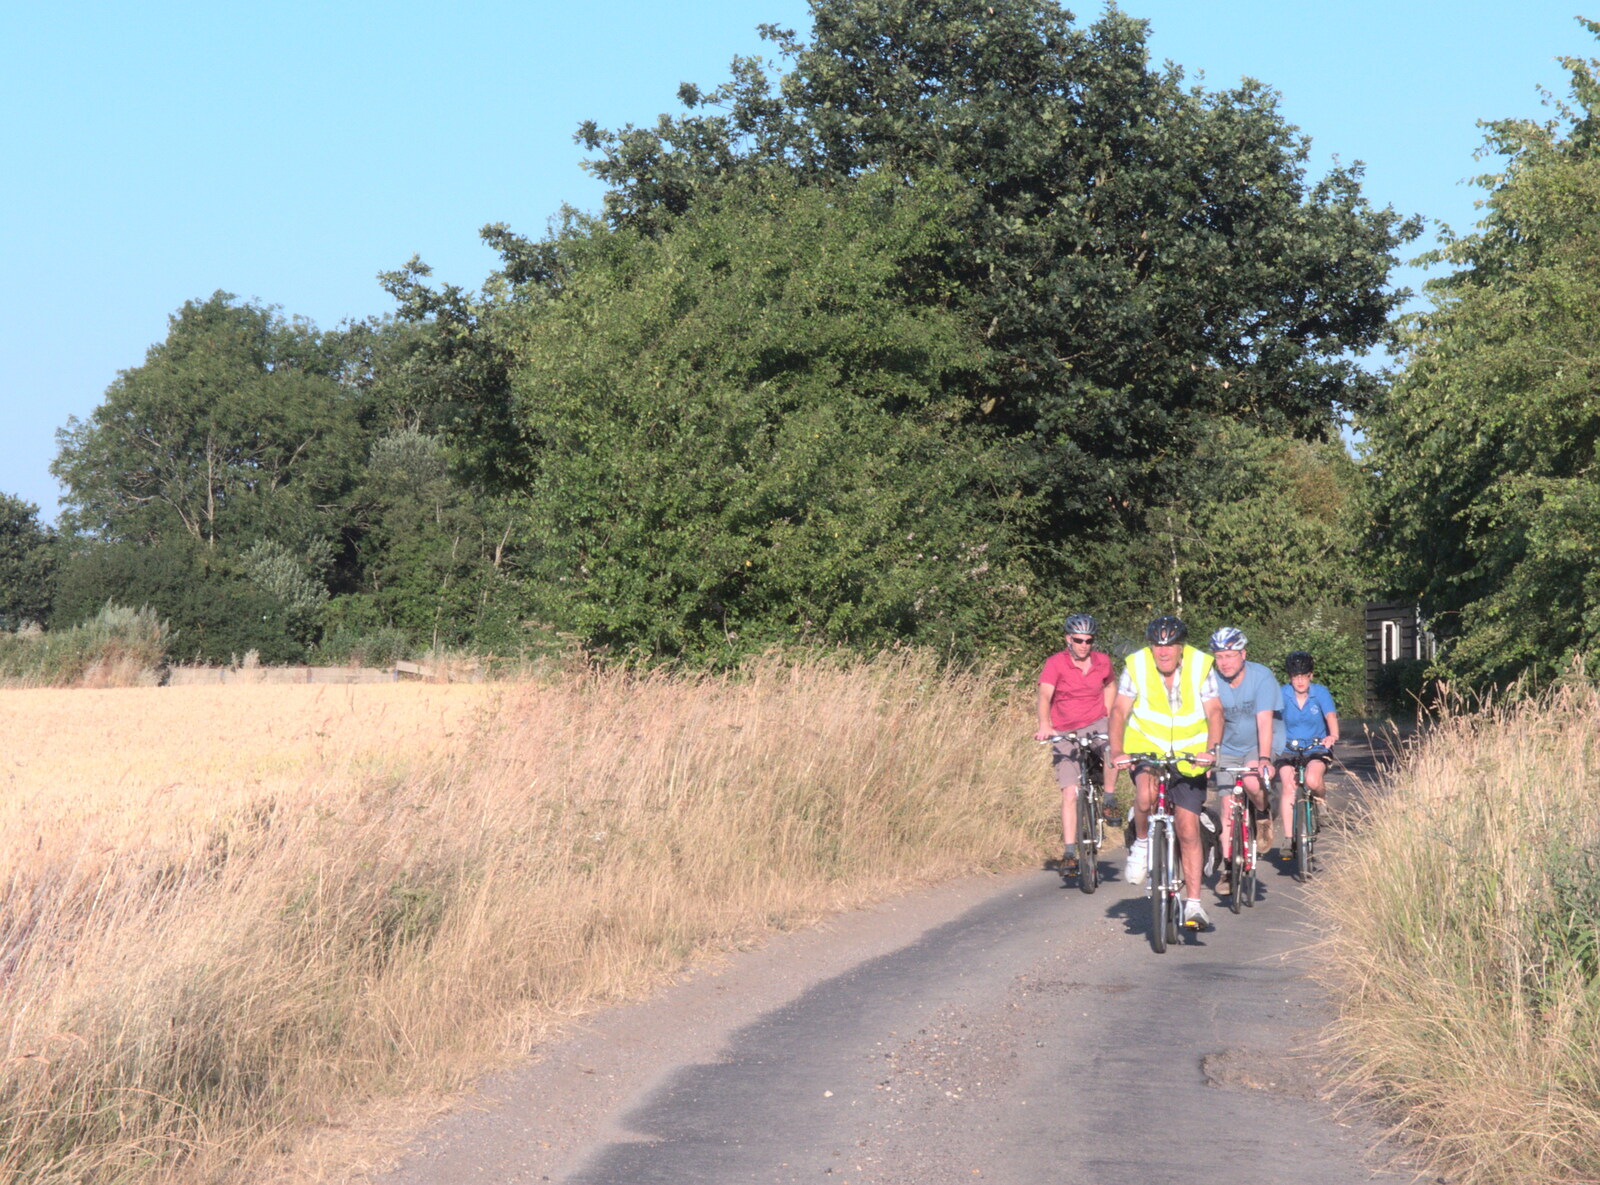 The BSCC Rides to Star Wing Beer Festival, Redgrave, Suffolk - 12th July 2018: Paul, Alan, Marc and Suey follow on